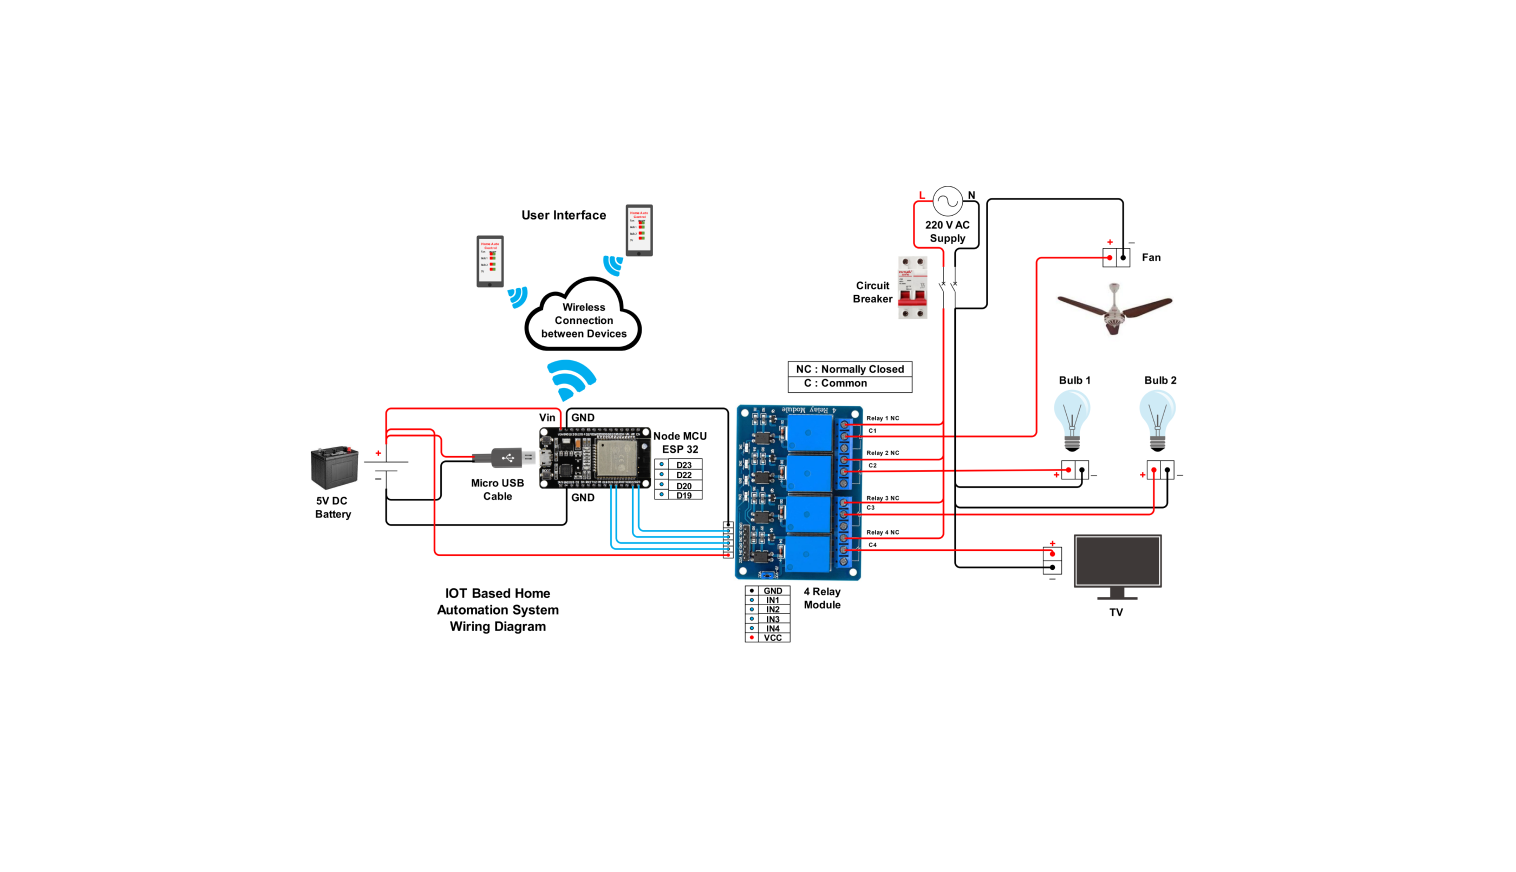 IoT-Based home automation wiring diagram